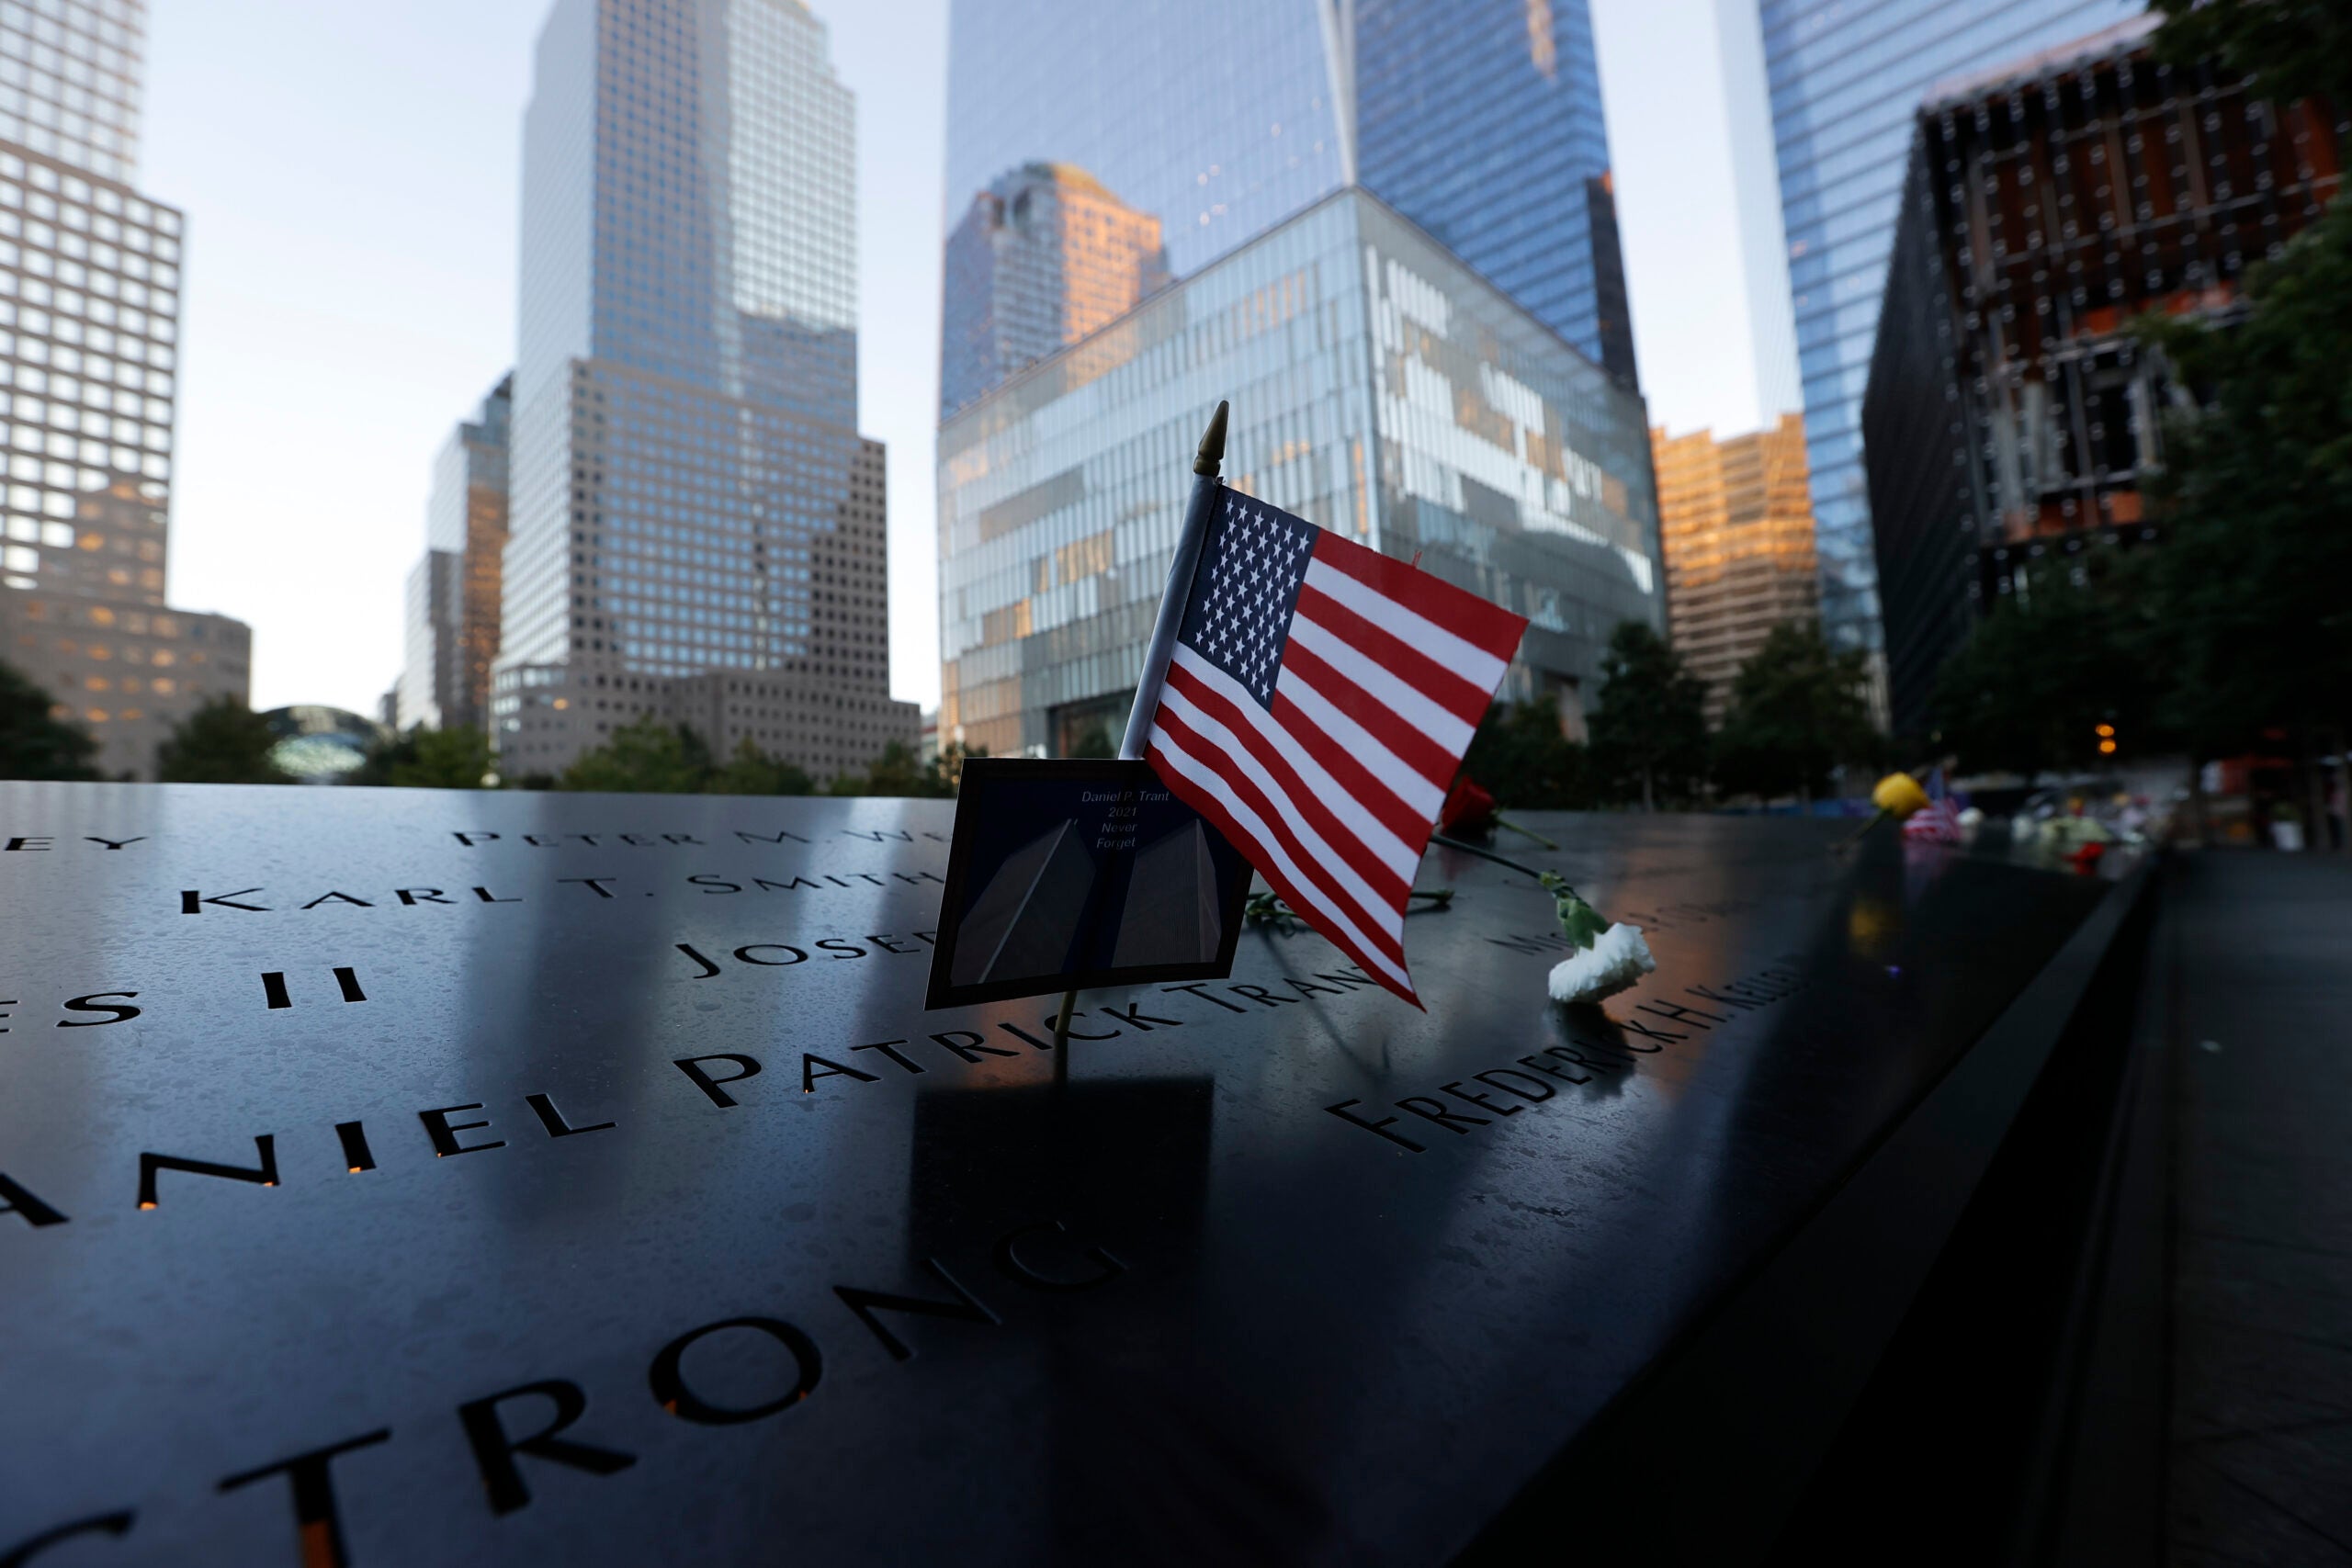 NEW YORK, NEW YORK - SEPTEMBER 11: A detail of the 9/11 Memorial is seen before a ceremony at the National September 11 Memorial &amp; Museum commemorating the 20th anniversary of the September 11th terrorist attacks on the World Trade Center on September 11, 2021 in New York City. The nation is marking the 20th anniversary of the terror attacks of September 11, 2001, when the terrorist group al-Qaeda flew hijacked airplanes into the World Trade Center, Shanksville, PA, and the Pentagon, killing nearly 3,000 people. (Photo by Mike Segar-Pool/Getty Images)